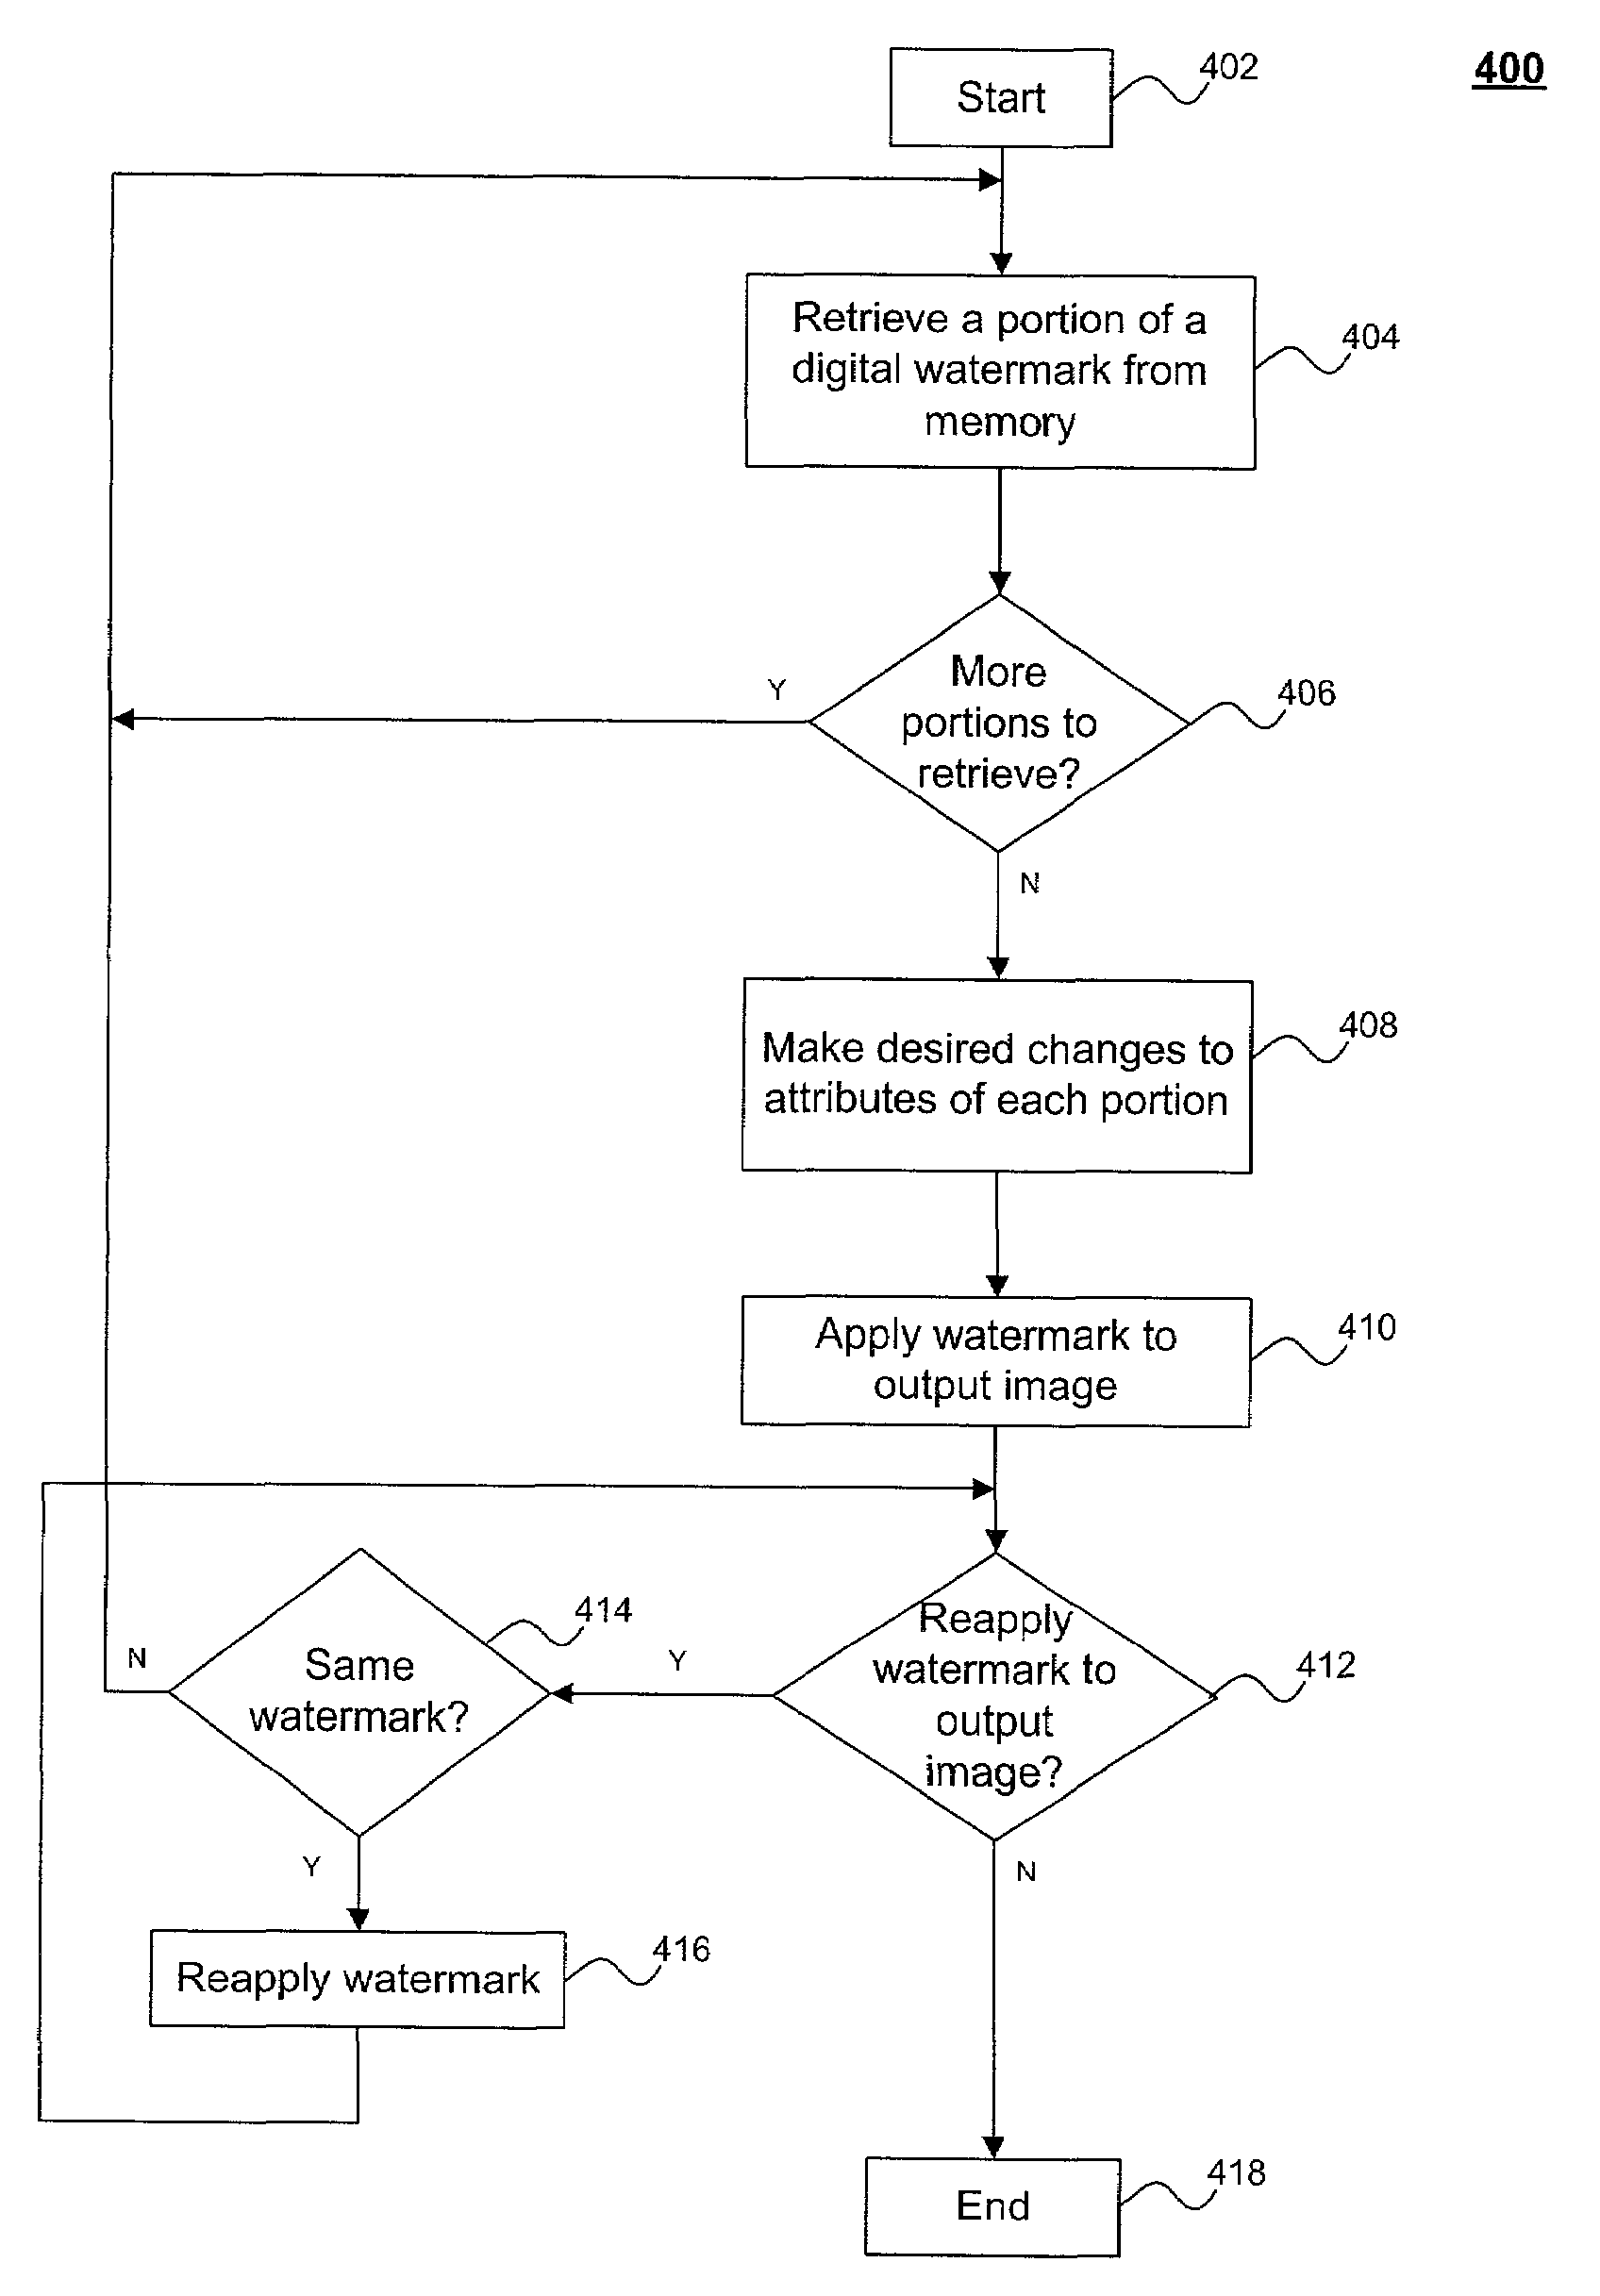 Method for applying a digital watermark to an output image from a computer program